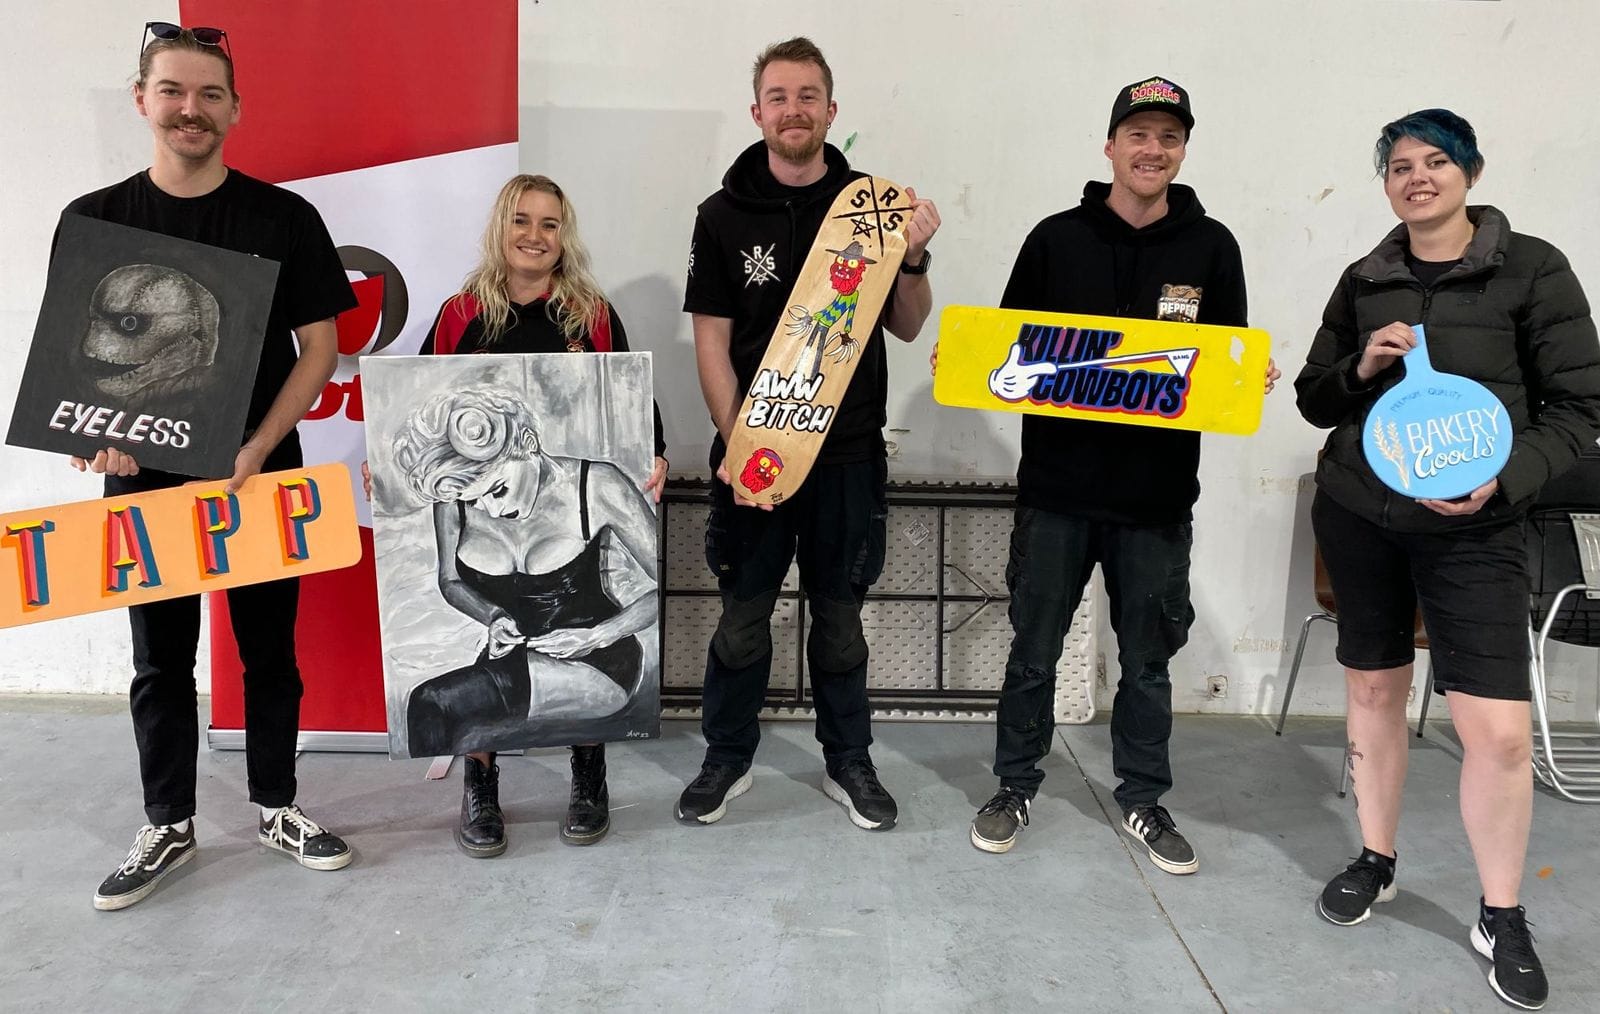 Five people standing in a line proudly holding various pieces of hand-painted artwork and lettering in front of them.